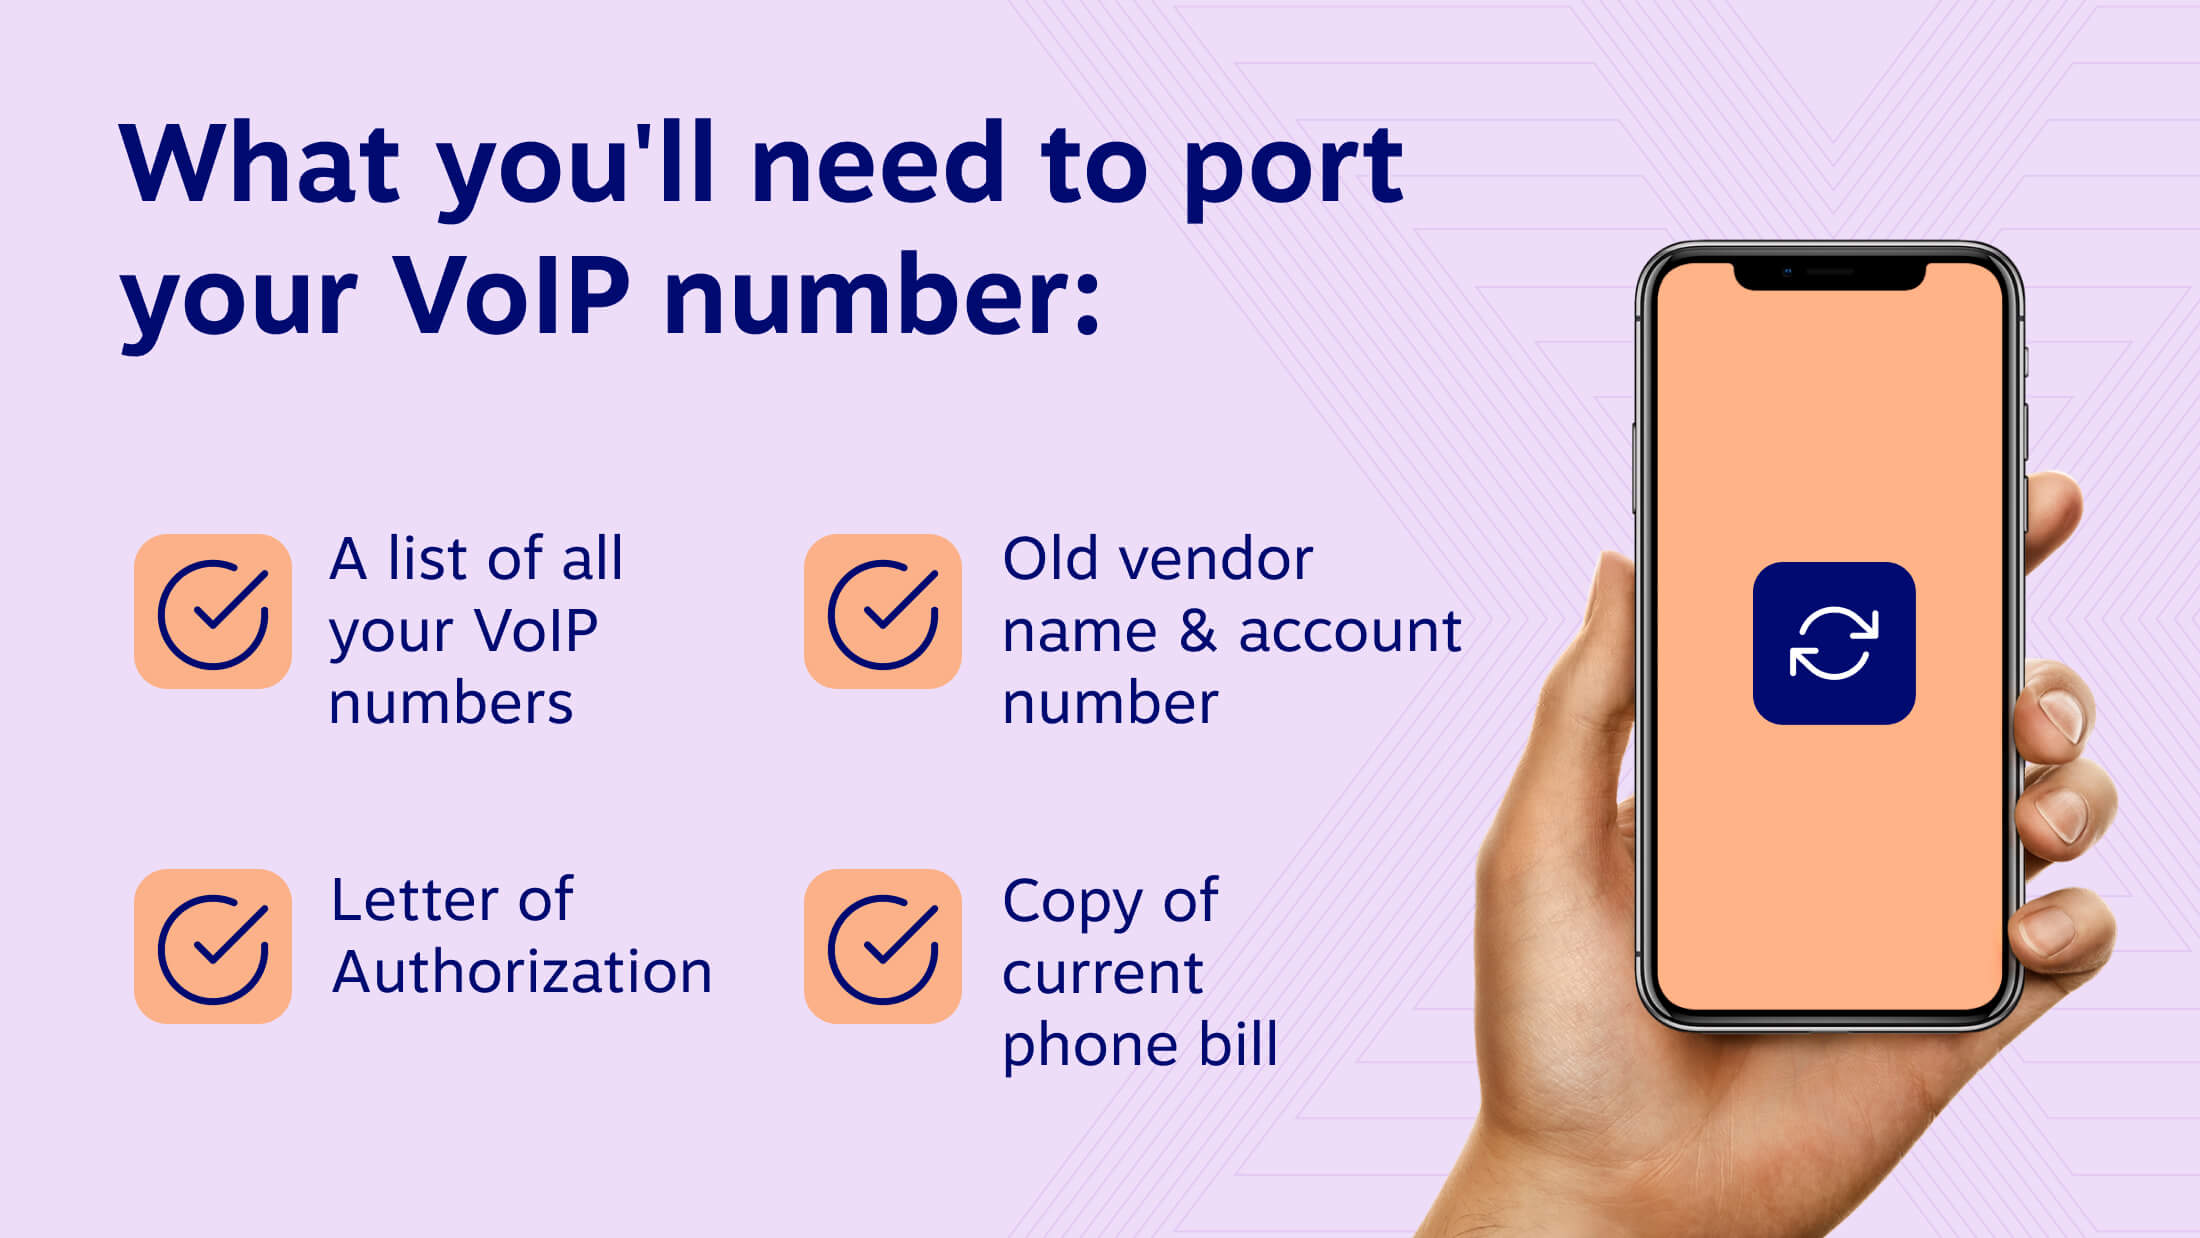 What you'll need to port your VoIP number: 